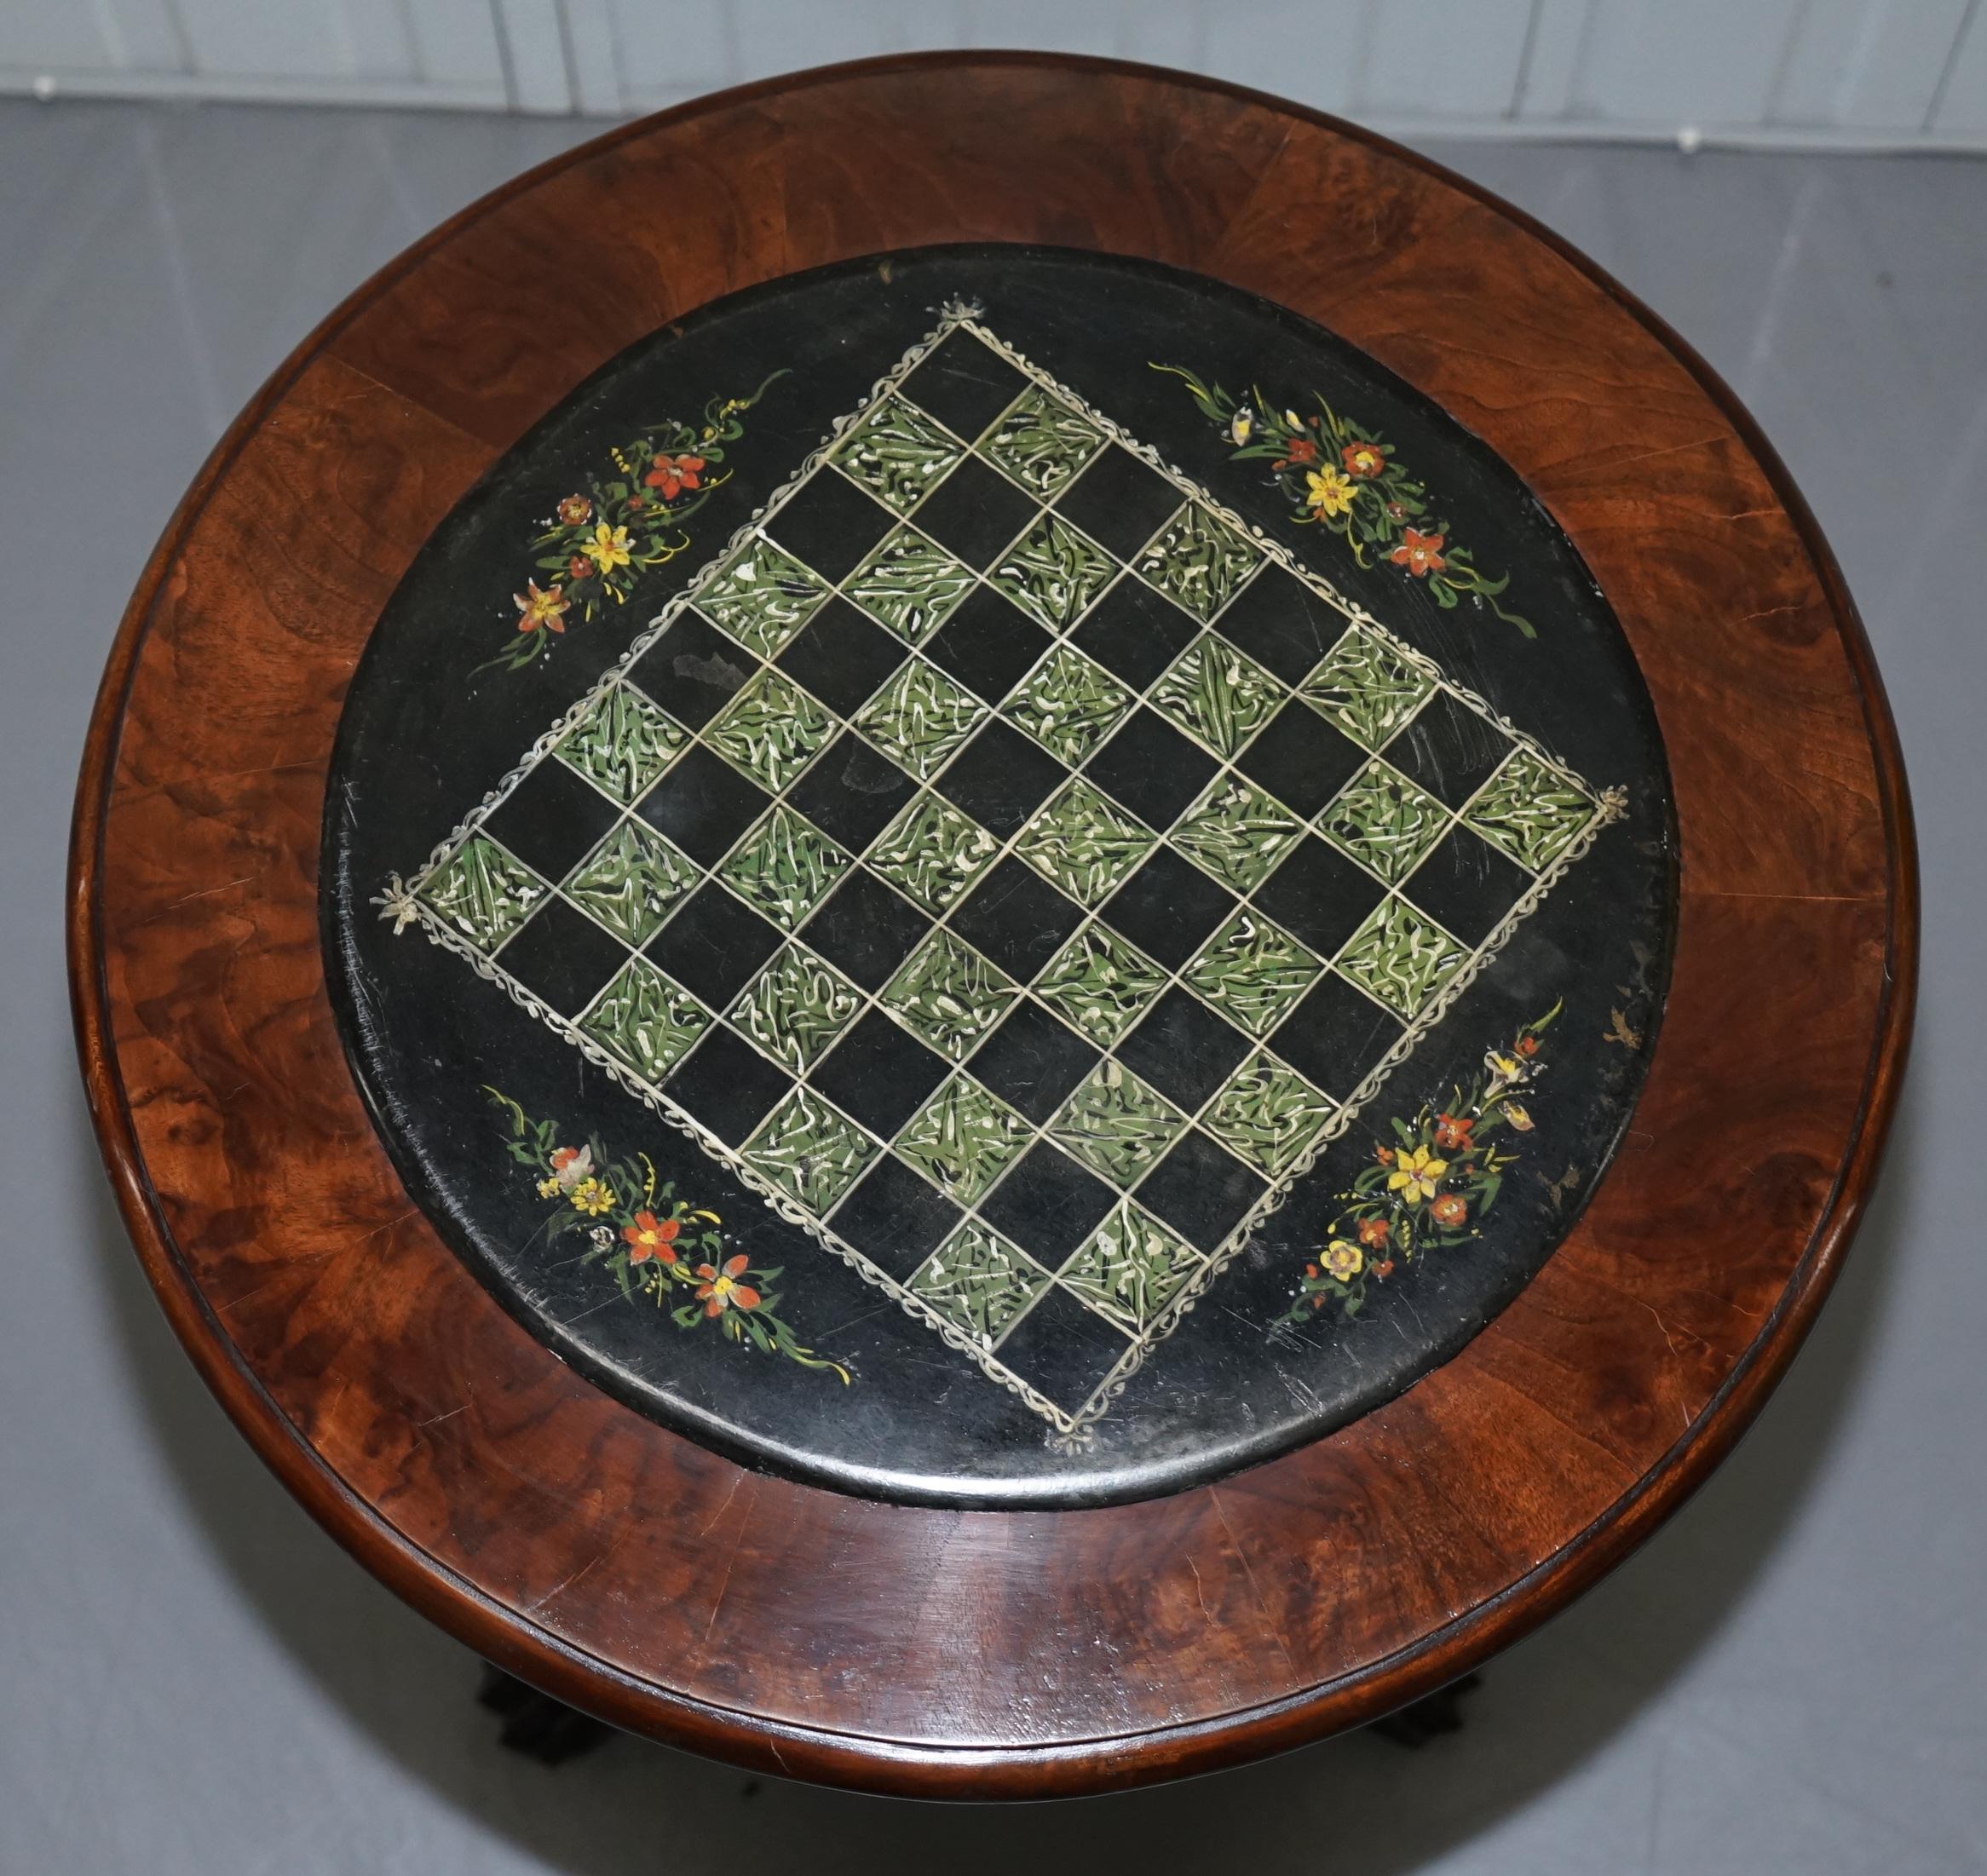 We are delighted to this very rare circa 1860 solid hand carved mahogany tripod games table depicting Griffin’s with marble Chess games board top

This table is one of a pair, the other has a Pietra Dura marble top with butterfly's which is listed